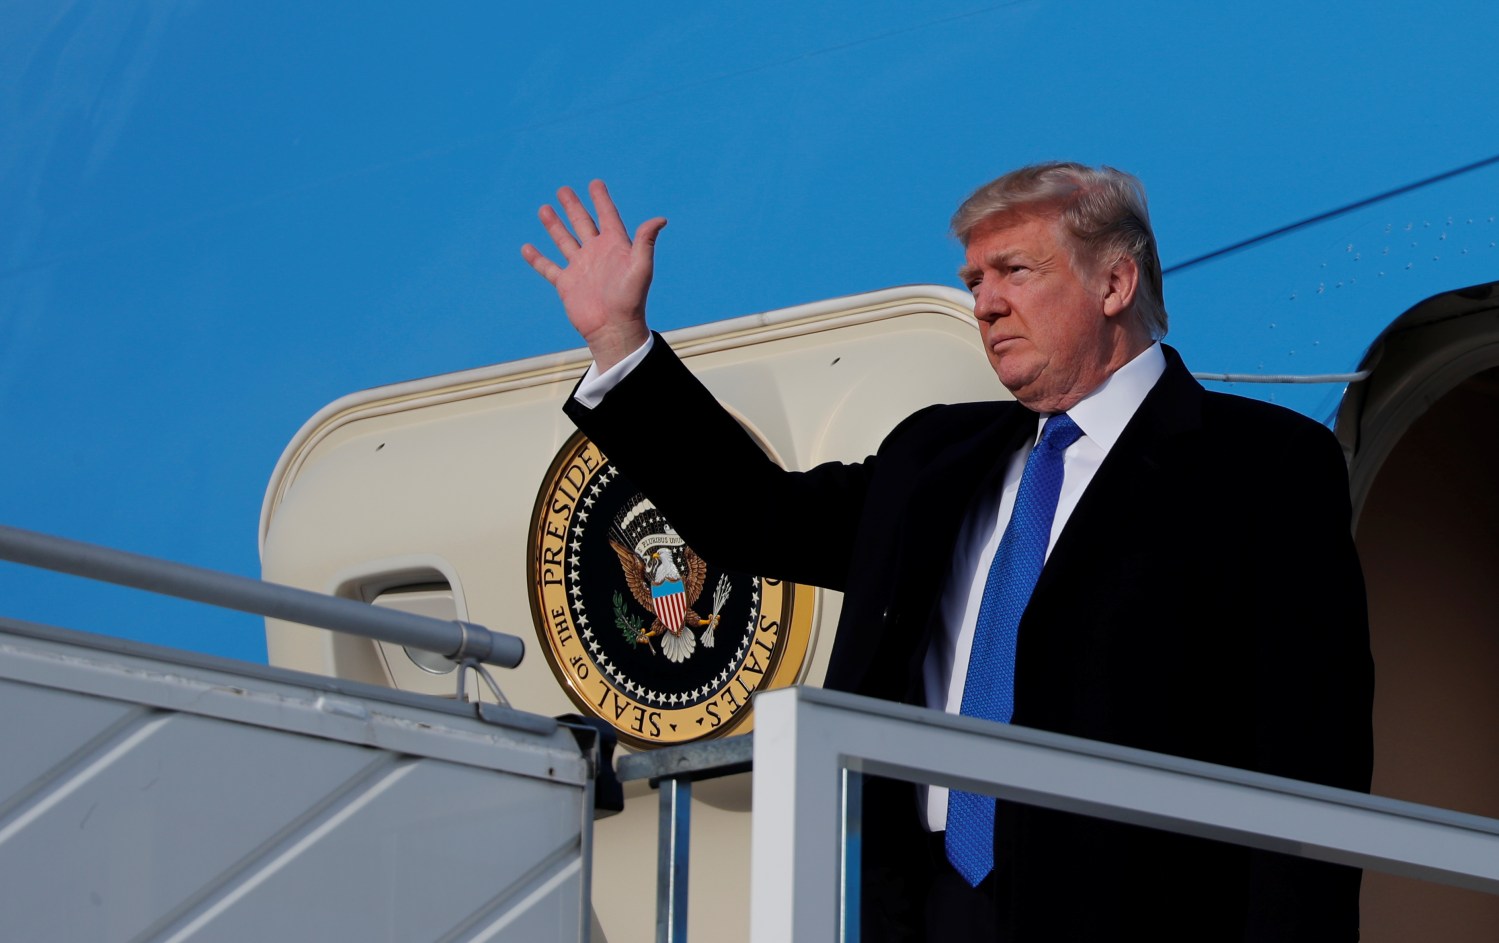 U.S. President Donald Trump waves as he arrives in Zurich, Switzerland January 25, 2018. REUTERS/Carlos Barria